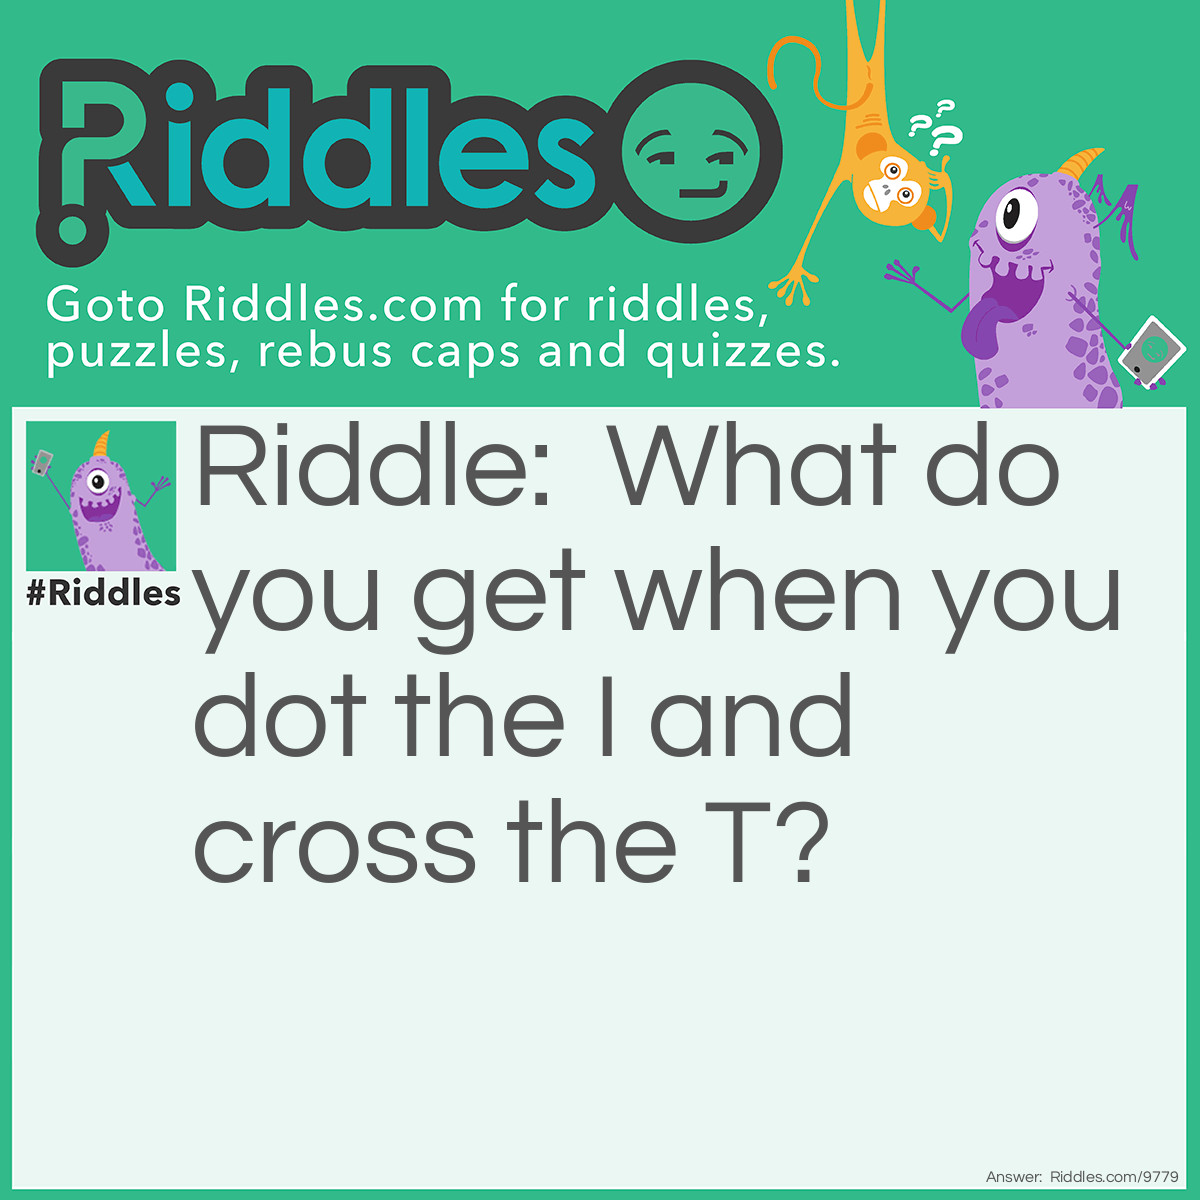 Riddle: What do you get when you dot the I and cross the T? Answer: “You get it.”